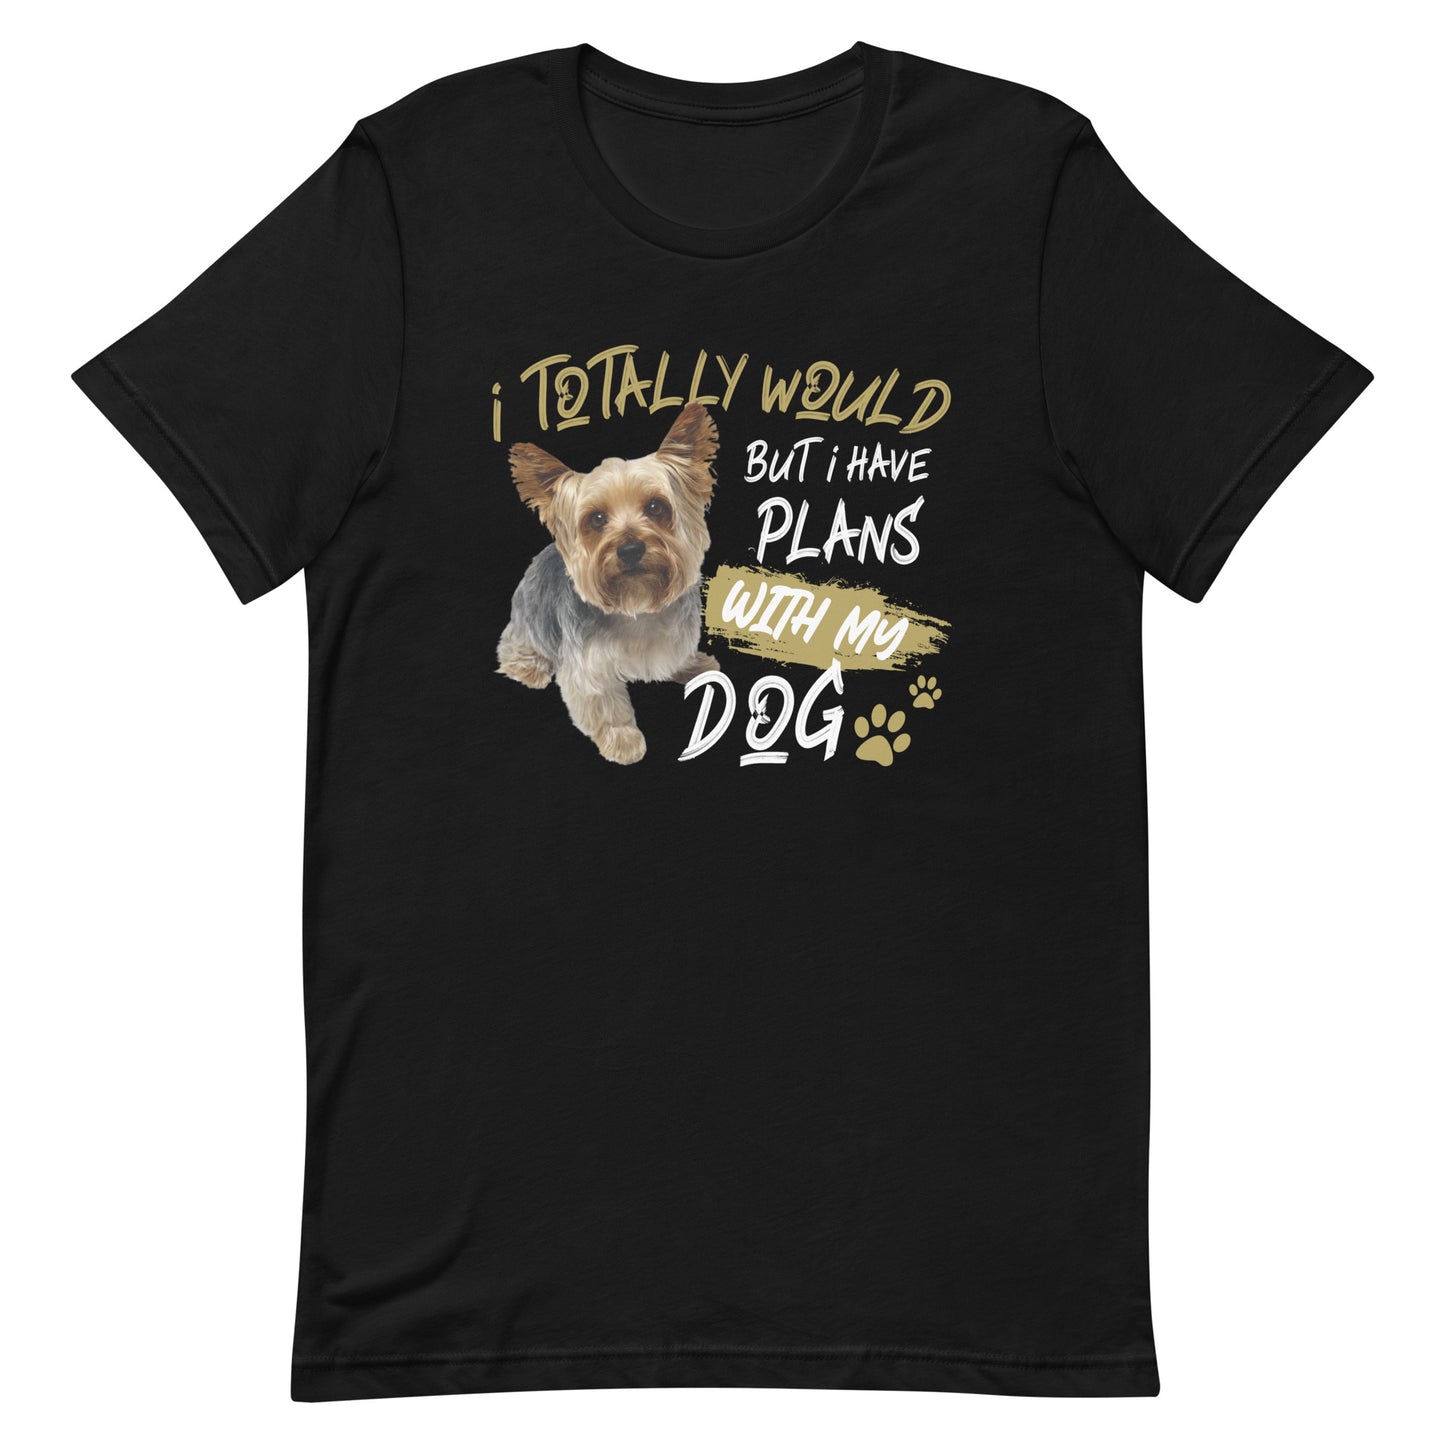 I Totally Would But I Have Plans with My Dog T-Shirt